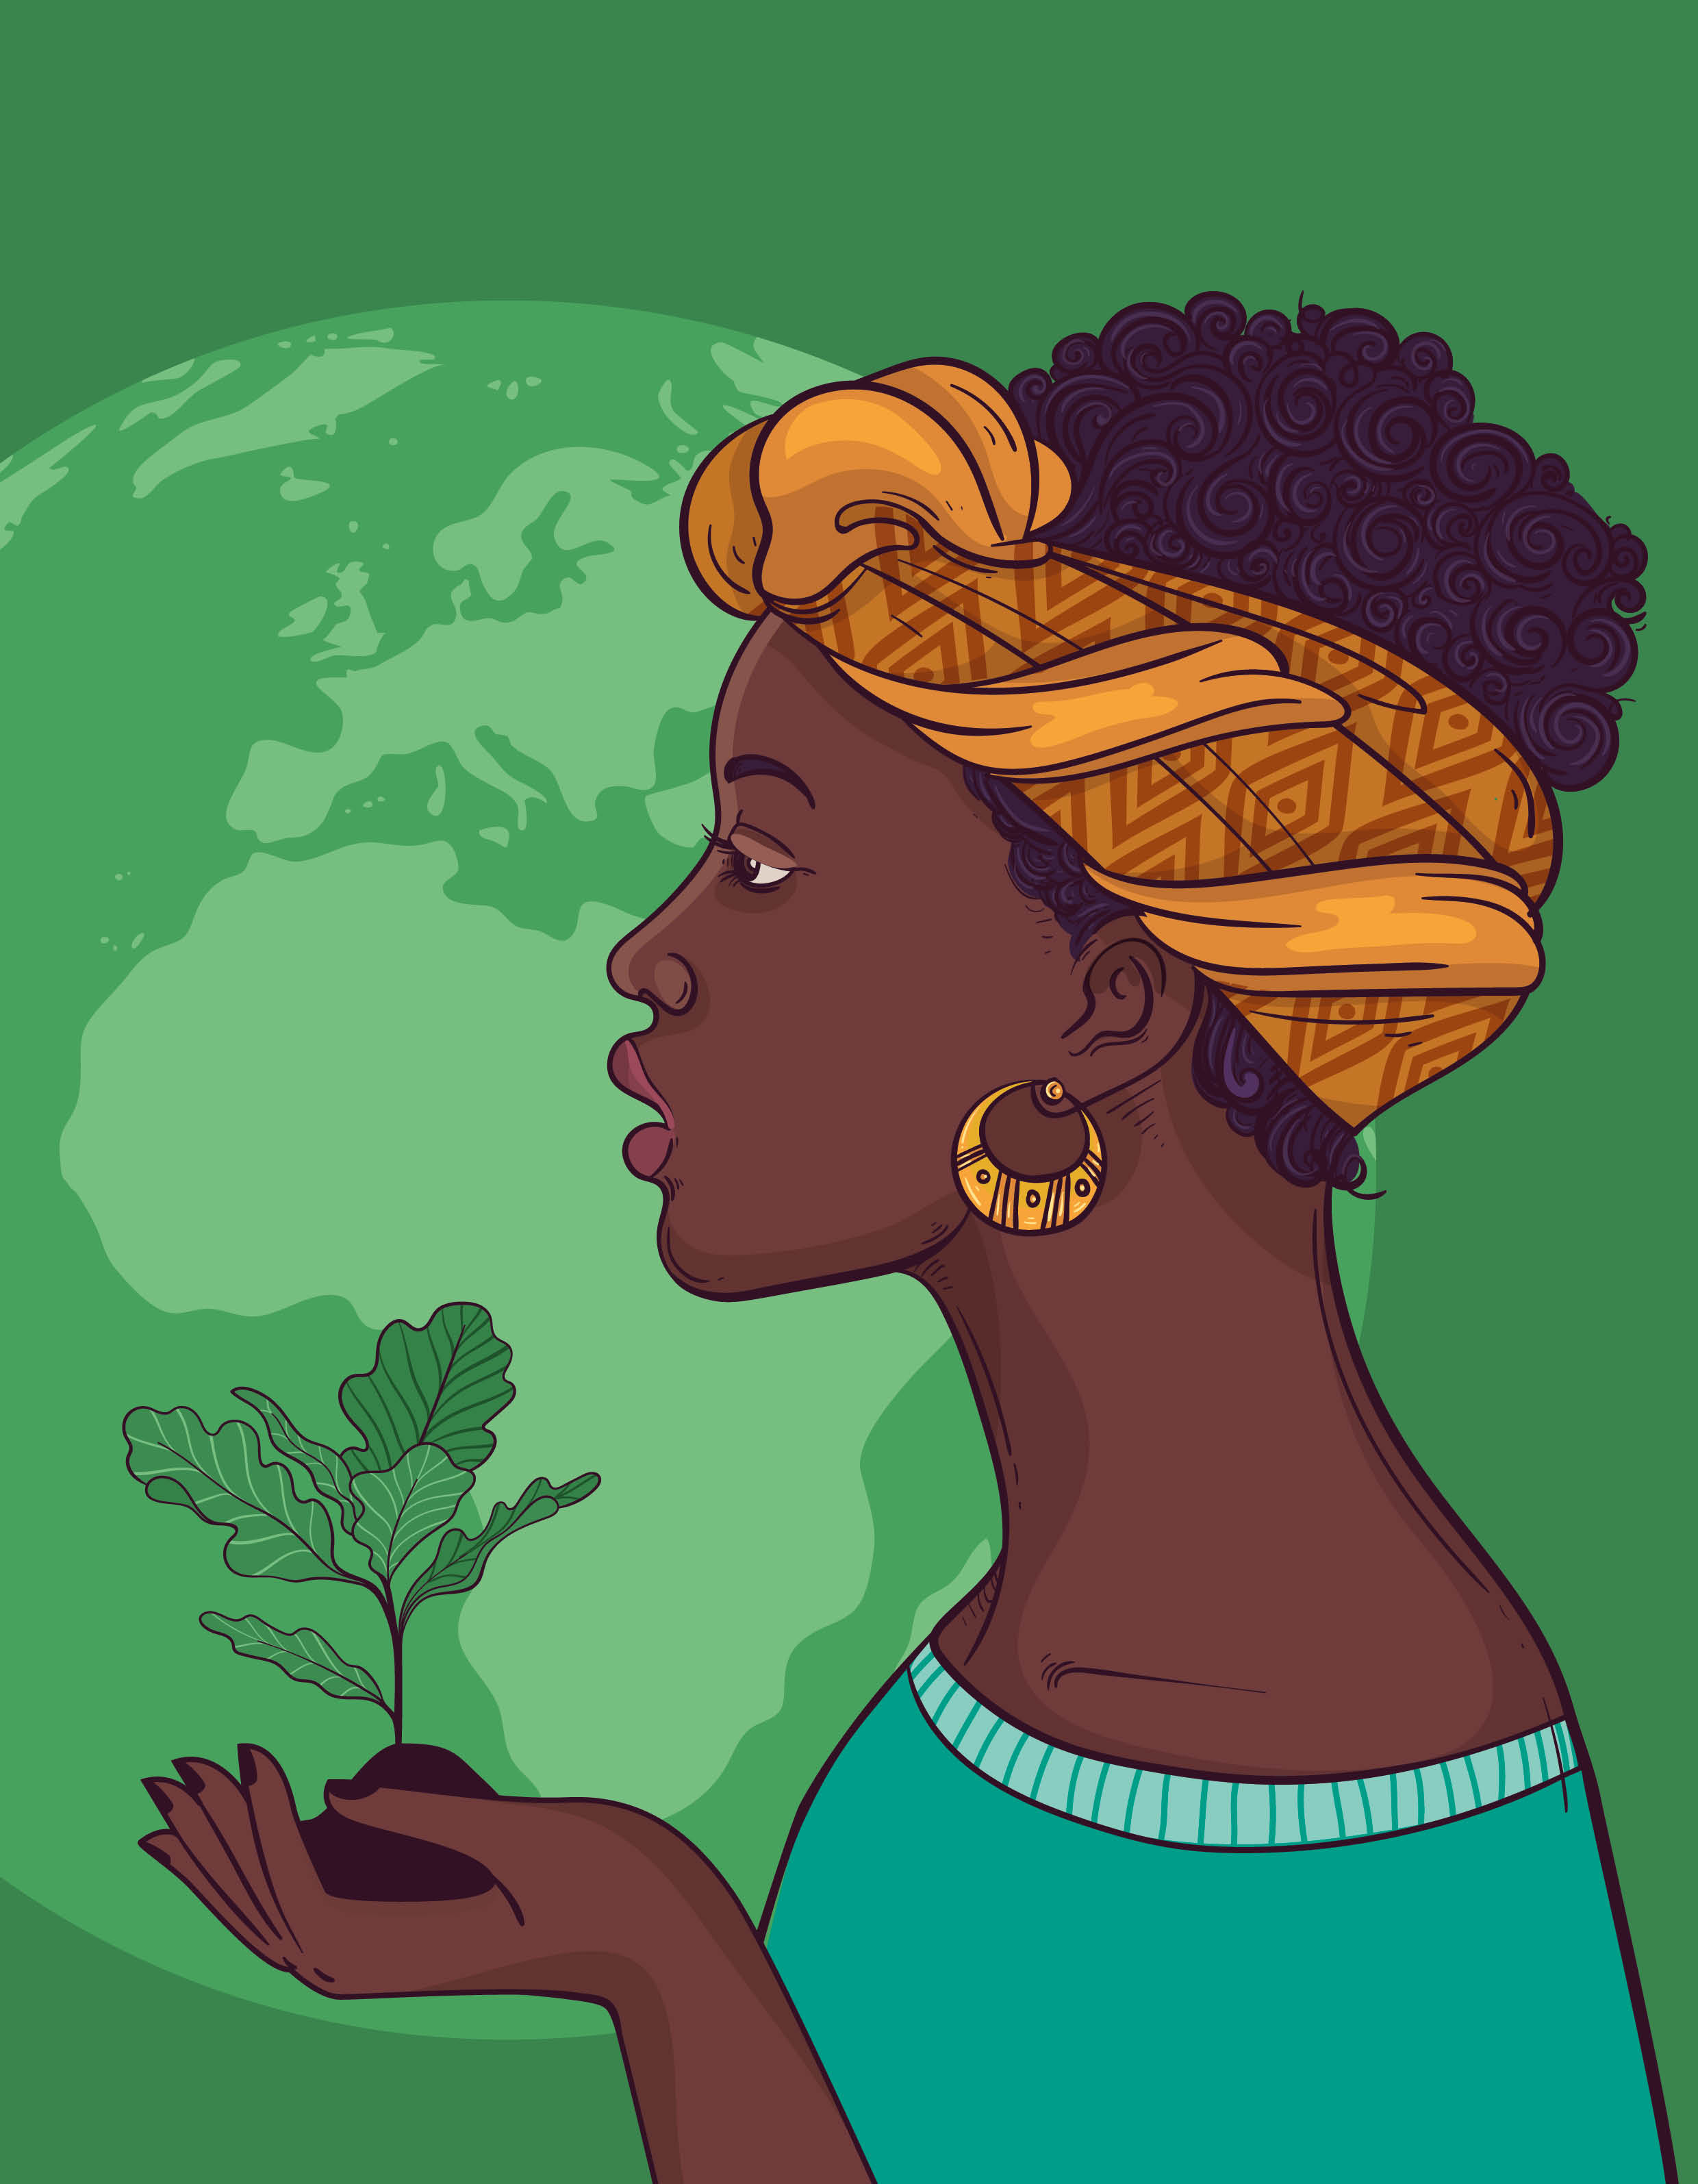 Women agriculturalists in Africa